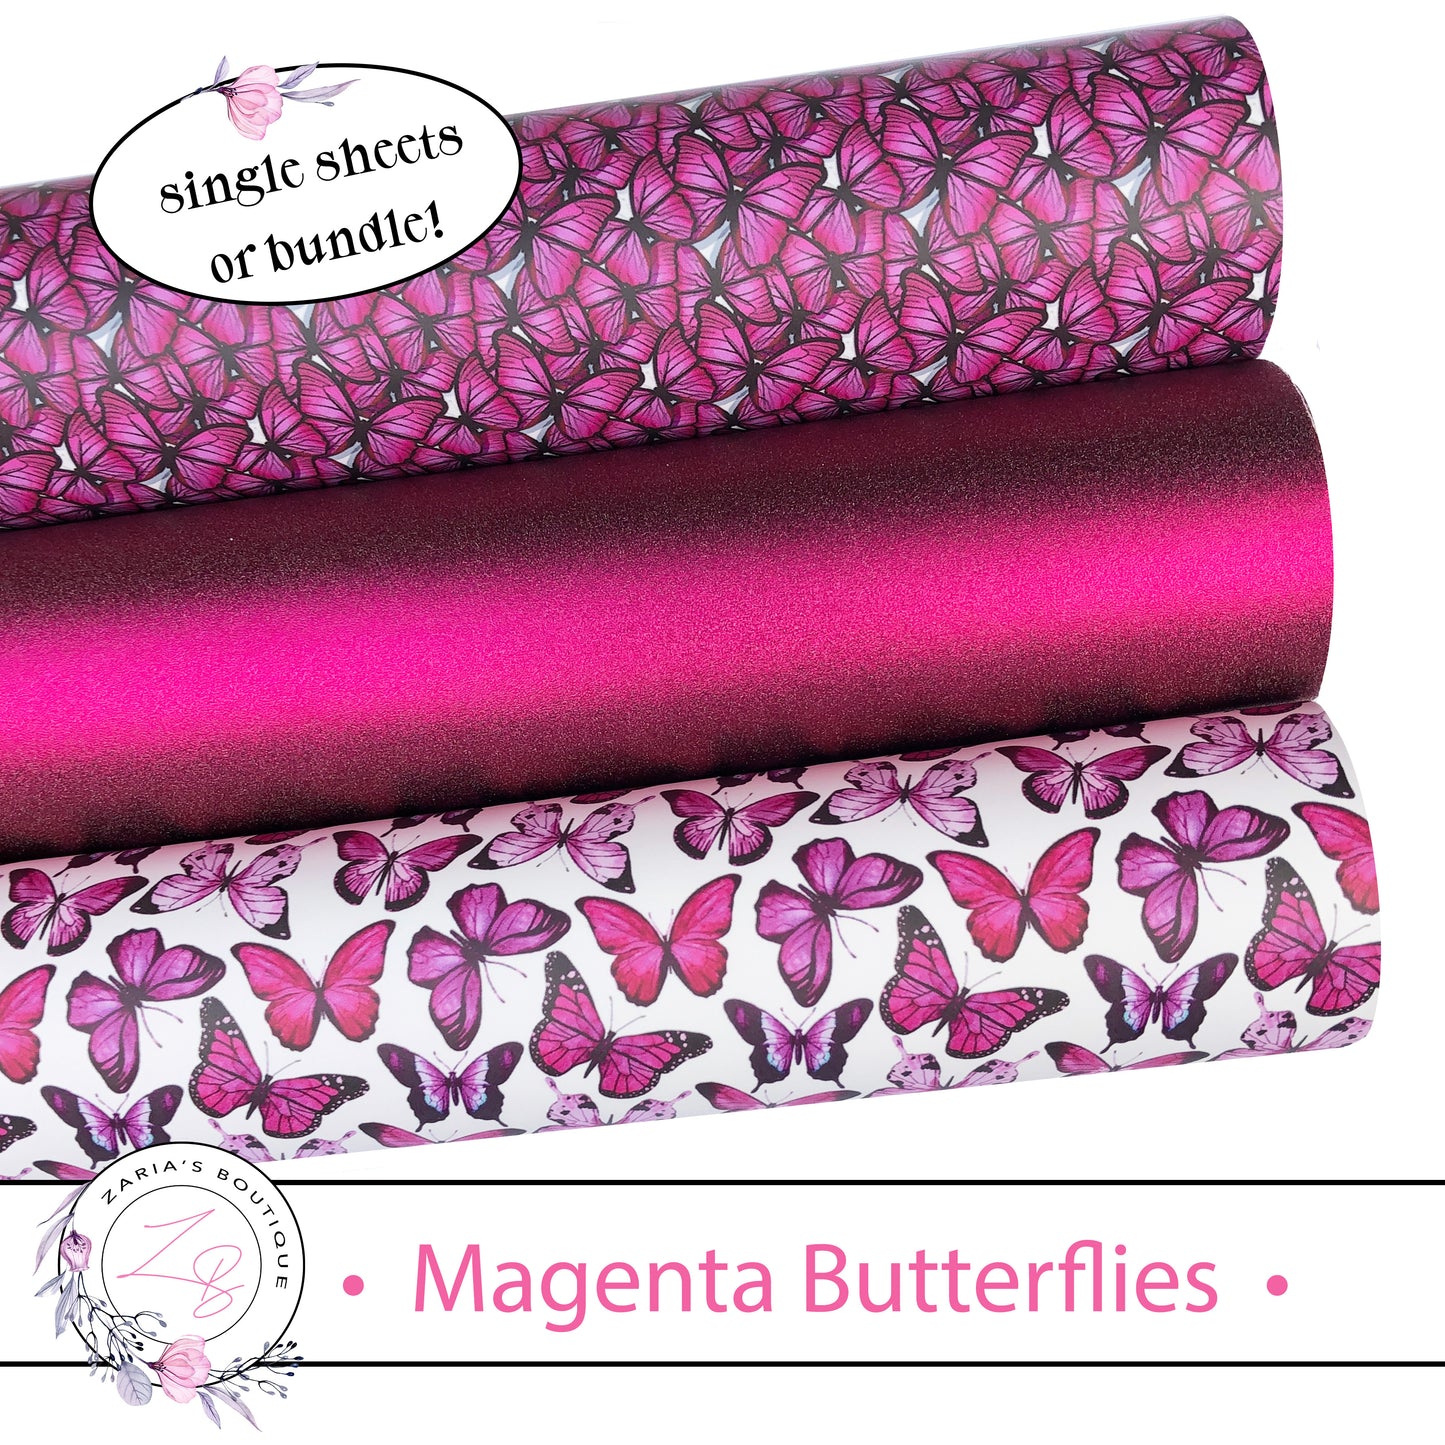 ⋅ Magenta Butterflies ⋅ EXCLUSIVE TO ZB  ⋅ Vegan Faux Leather ⋅ Single Sheets & Multi-Packs